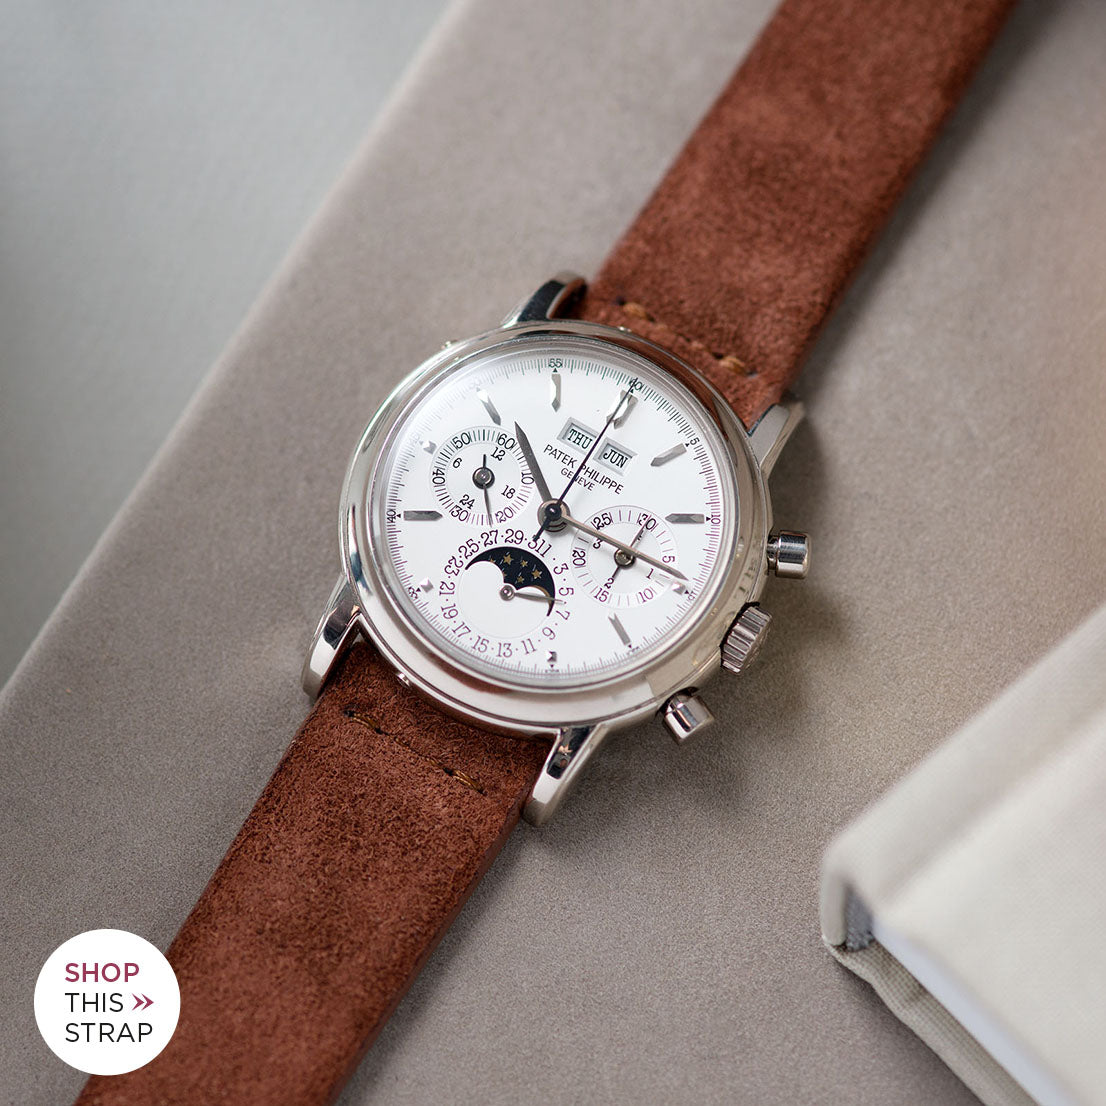 Bulang and Sons_Strap Guide_The Patek Philippe 3970 G White Gold Perpetual Calendar_Cognac Brown Silky Suede Leather Watch Strap